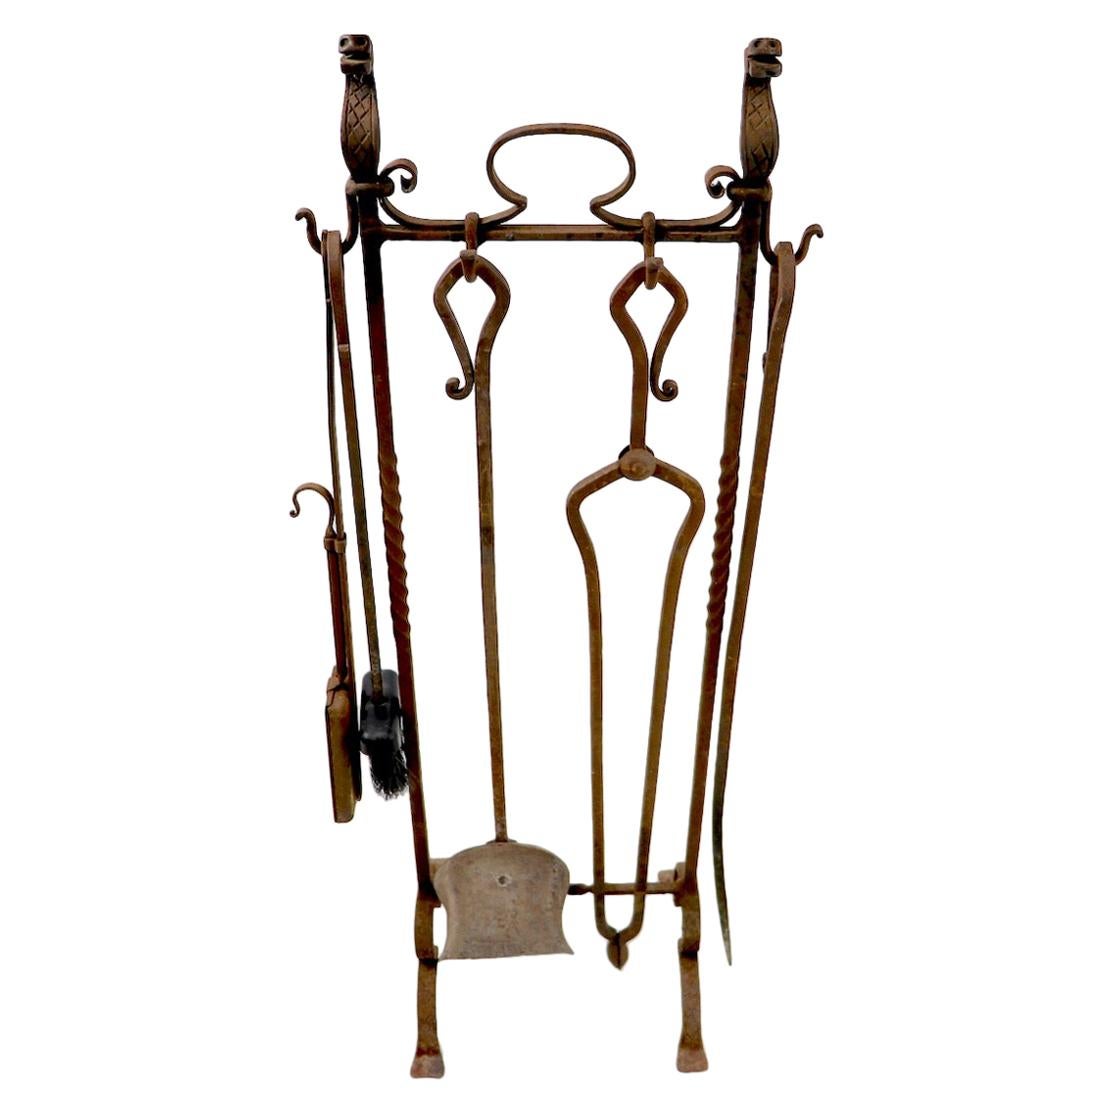 6-Piece Gothic Revival Fireplace Tool Set after Yellin